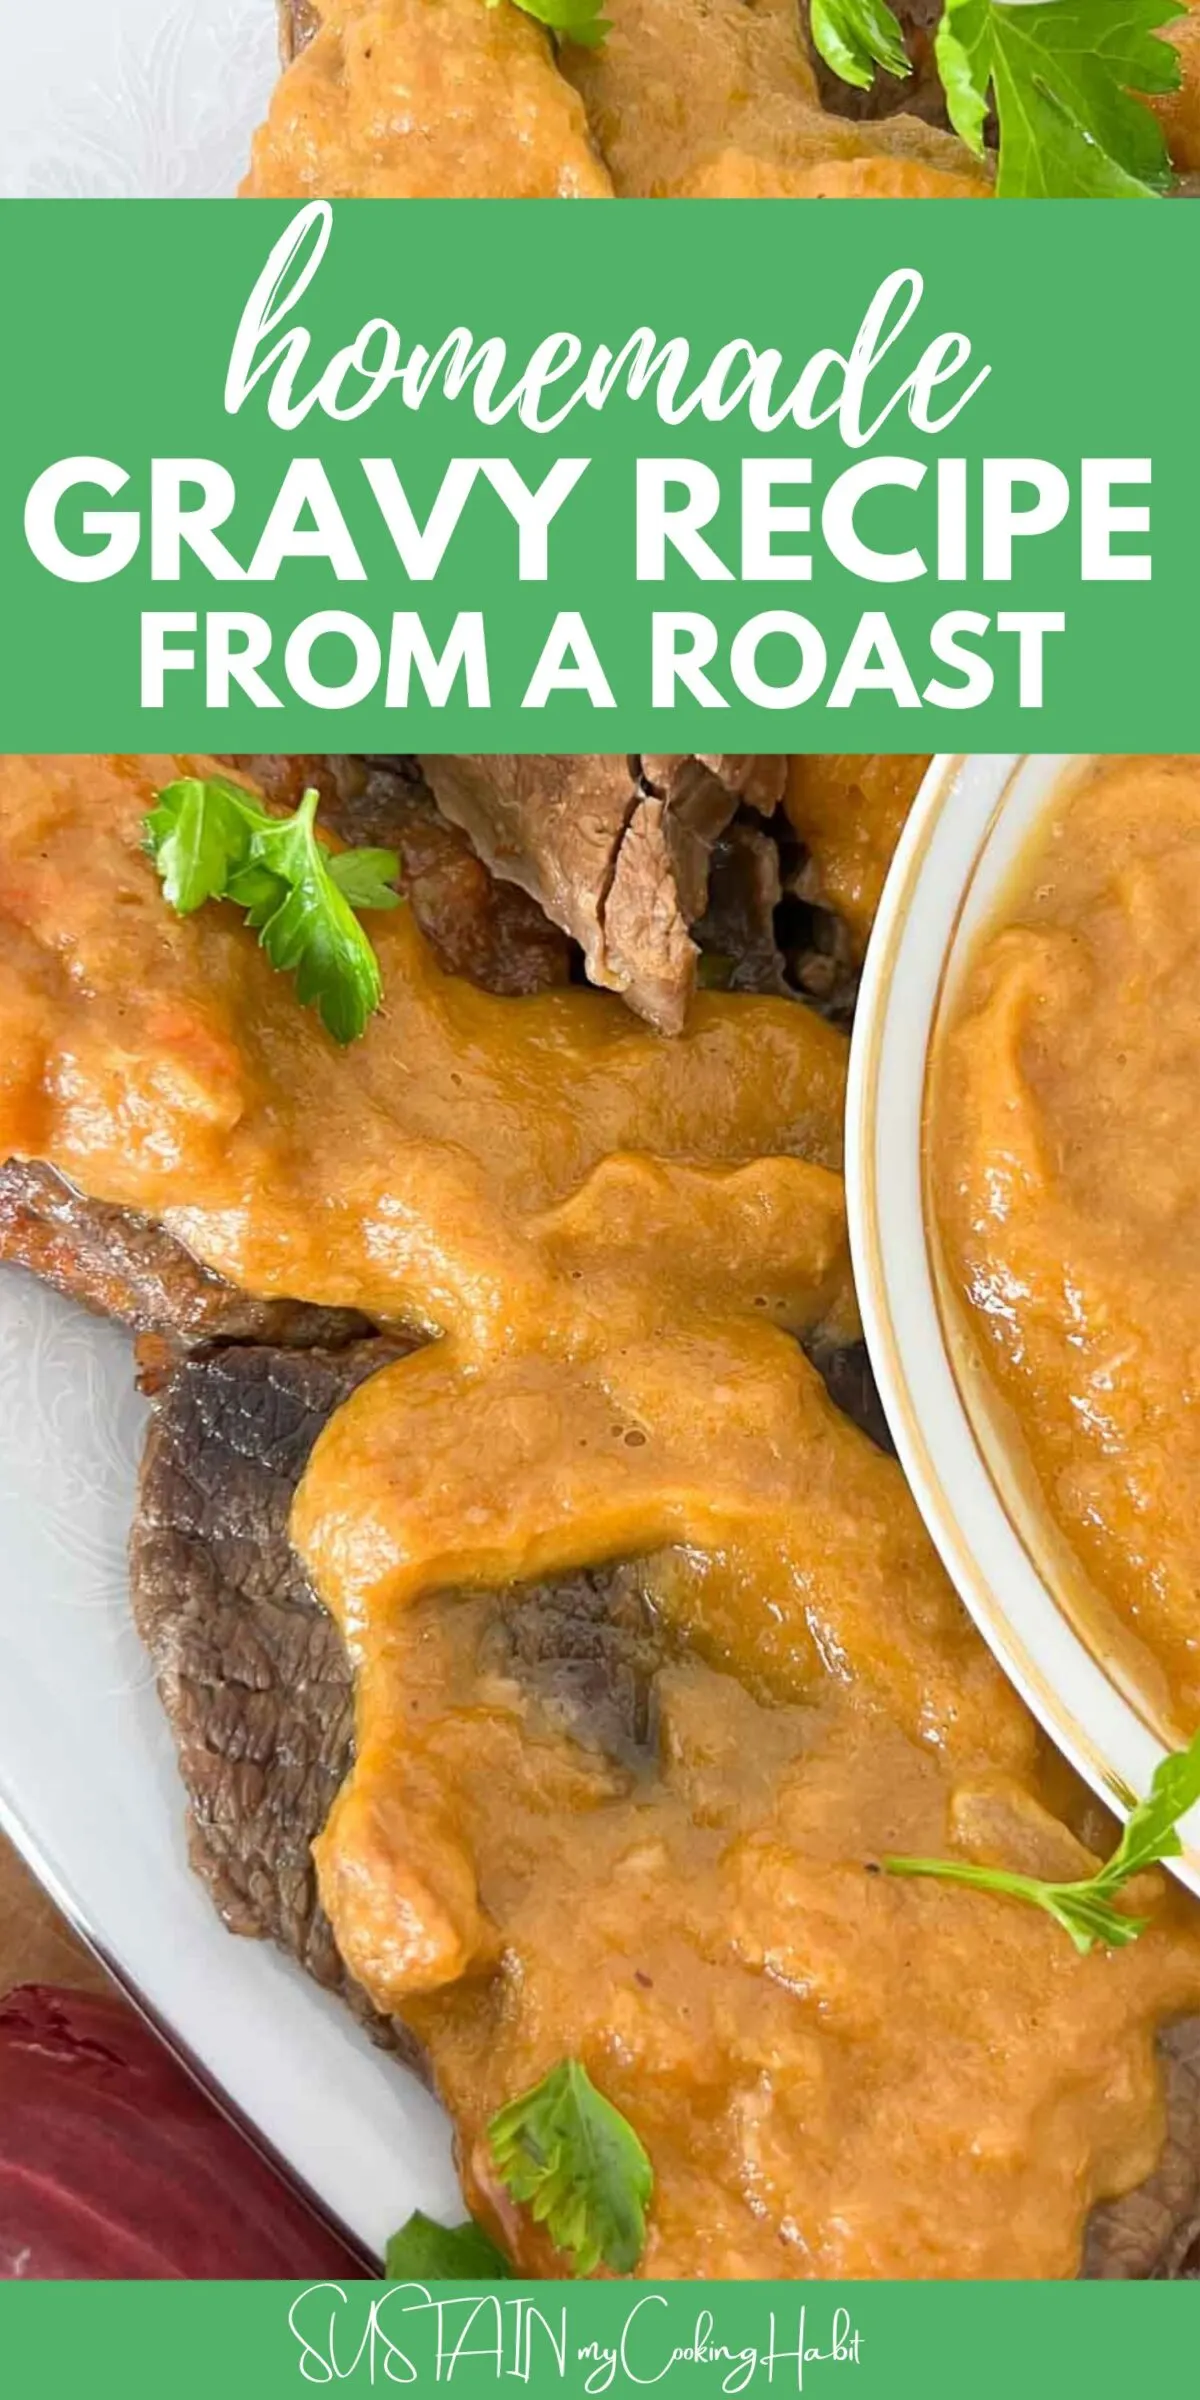 Roast beef smothered in homemade gravy with text overlay.